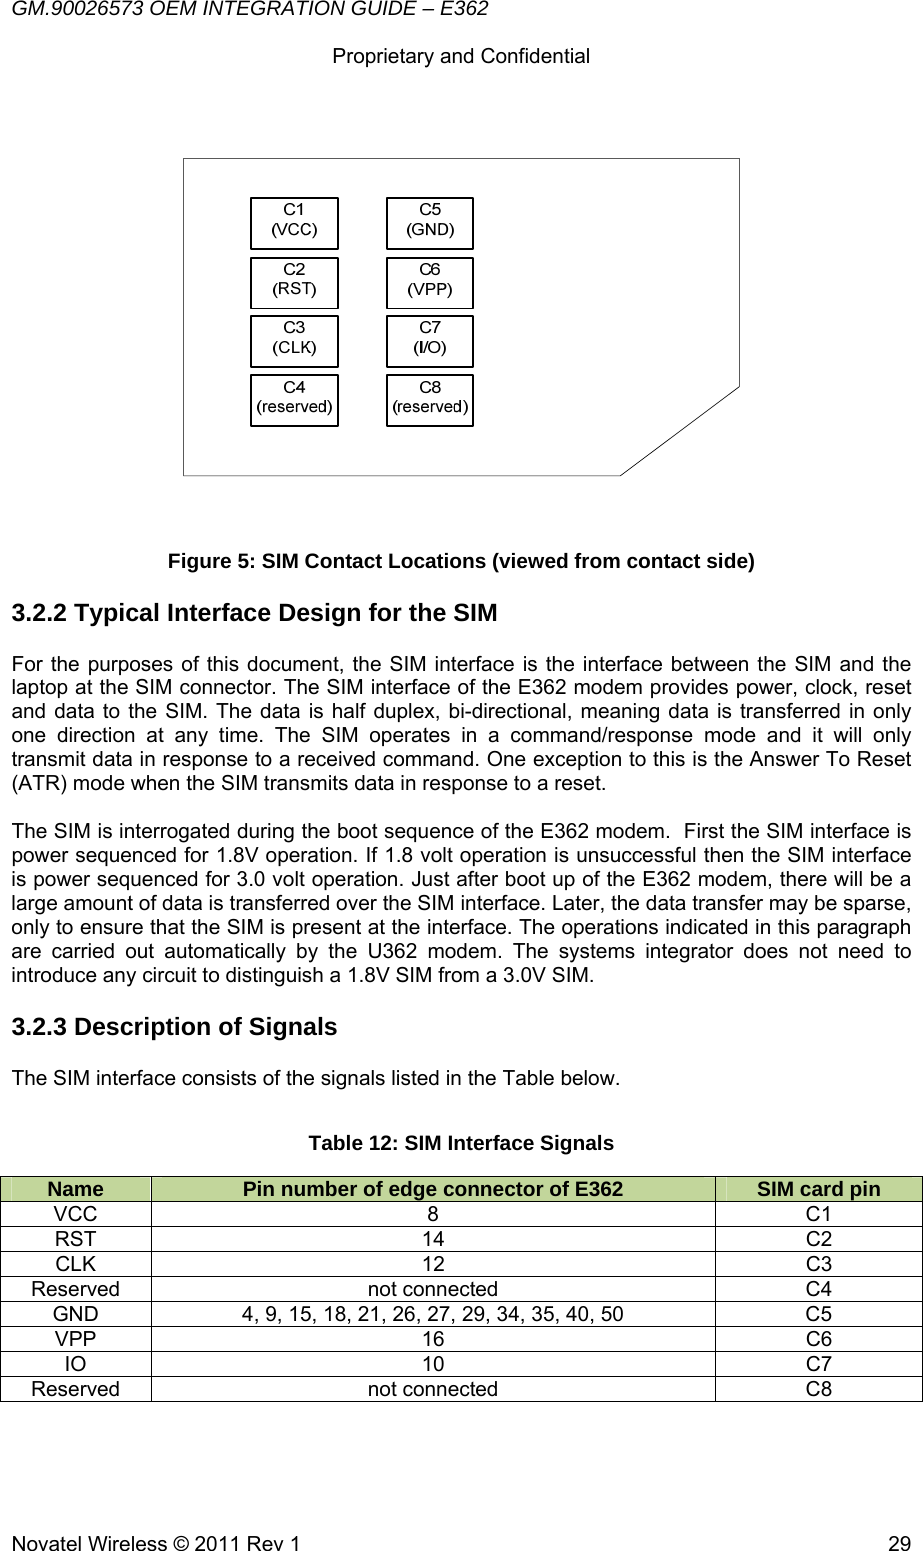 GM.90026573 OEM INTEGRATION GUIDE – E362      Proprietary and Confidential   Novatel Wireless © 2011 Rev 1  29 Figure 5: SIM Contact Locations (viewed from contact side) 3.2.2 Typical Interface Design for the SIM For the purposes of this document, the SIM interface is the interface between the SIM and the laptop at the SIM connector. The SIM interface of the E362 modem provides power, clock, reset and data to the SIM. The data is half duplex, bi-directional, meaning data is transferred in only one direction at any time. The SIM operates in a command/response mode and it will only transmit data in response to a received command. One exception to this is the Answer To Reset (ATR) mode when the SIM transmits data in response to a reset.  The SIM is interrogated during the boot sequence of the E362 modem.  First the SIM interface is power sequenced for 1.8V operation. If 1.8 volt operation is unsuccessful then the SIM interface is power sequenced for 3.0 volt operation. Just after boot up of the E362 modem, there will be a large amount of data is transferred over the SIM interface. Later, the data transfer may be sparse, only to ensure that the SIM is present at the interface. The operations indicated in this paragraph are carried out automatically by the U362 modem. The systems integrator does not need to introduce any circuit to distinguish a 1.8V SIM from a 3.0V SIM. 3.2.3 Description of Signals The SIM interface consists of the signals listed in the Table below. Table 12: SIM Interface Signals Name  Pin number of edge connector of E362  SIM card pin VCC 8  C1 RST 14  C2 CLK 12  C3 Reserved not connected  C4 GND  4, 9, 15, 18, 21, 26, 27, 29, 34, 35, 40, 50  C5 VPP 16  C6 IO 10  C7 Reserved not connected  C8   